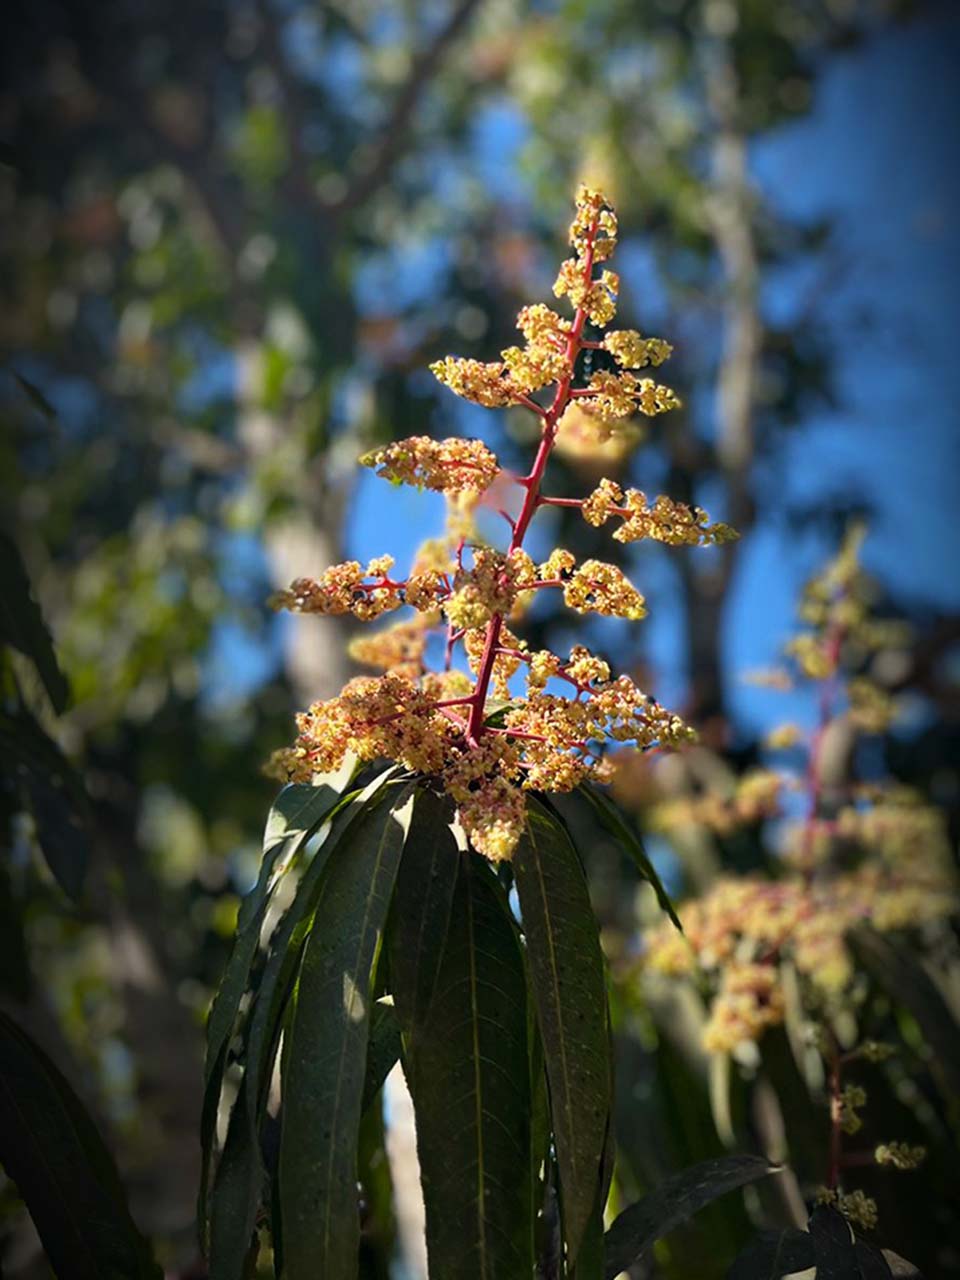 The Mango Flowering Process and Fruit Setting